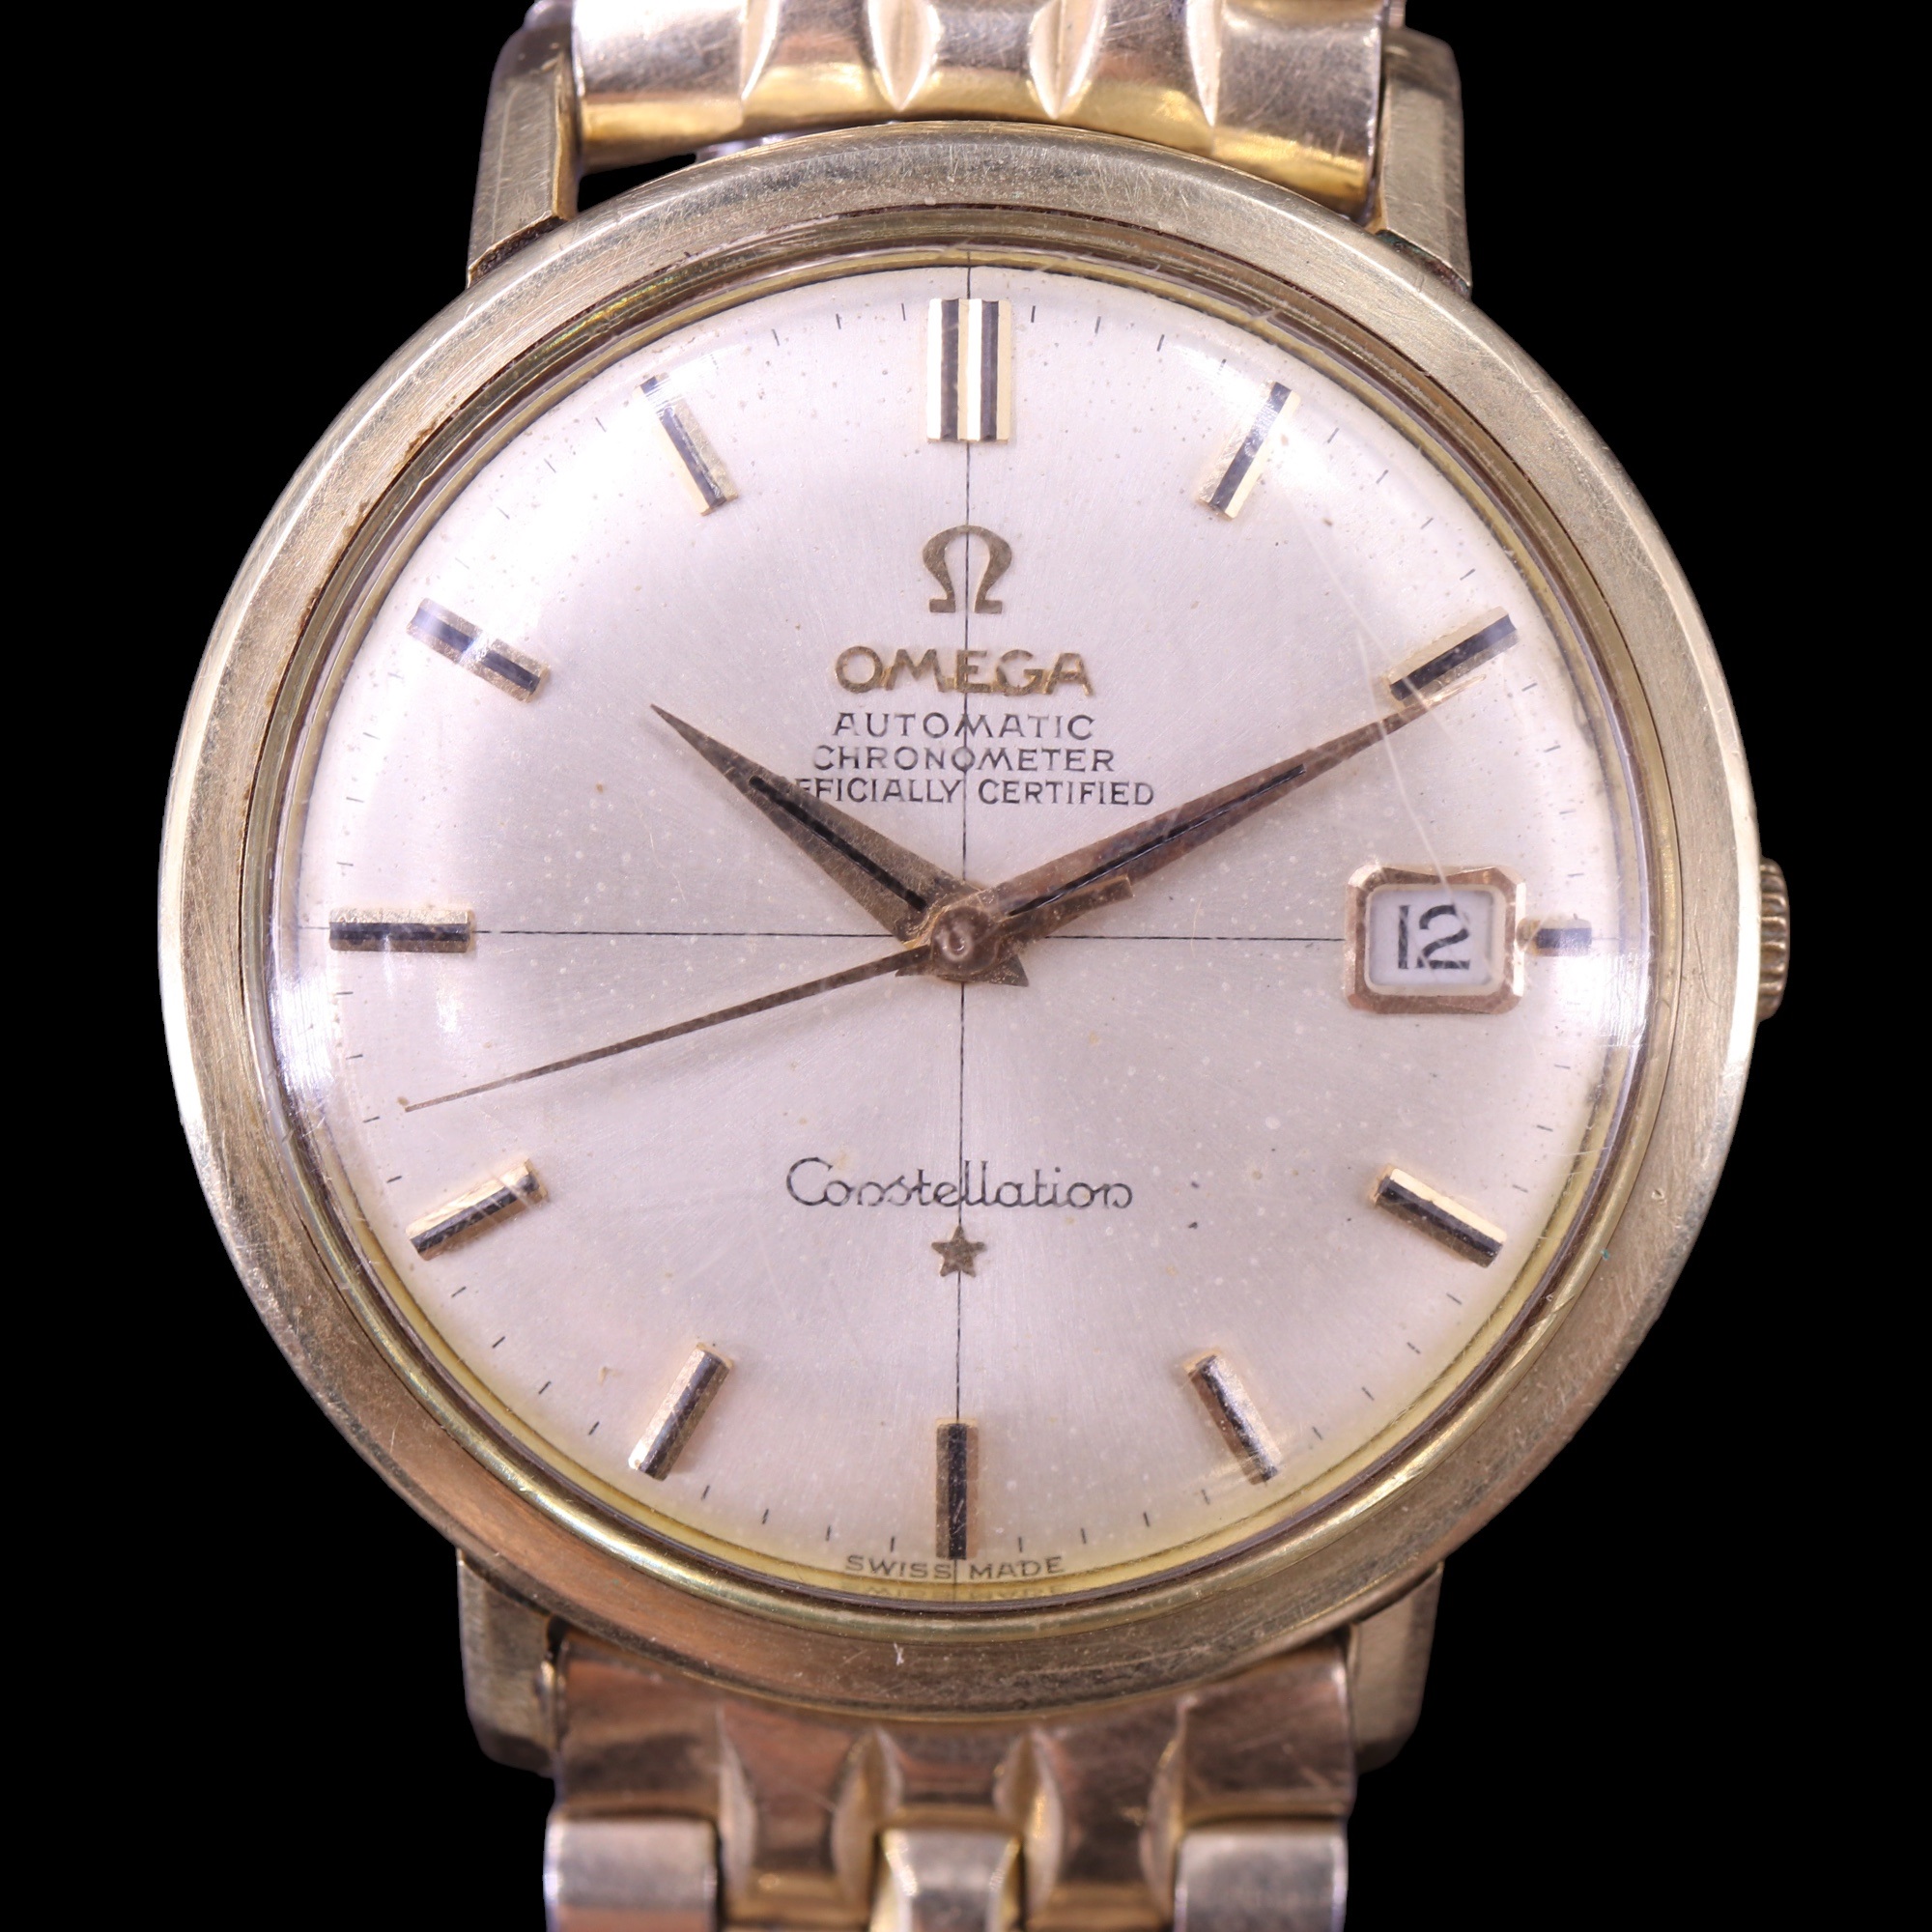 A 1966 Omega Constellation wristwatch, having a calibre 561 automatic chronometer movement and